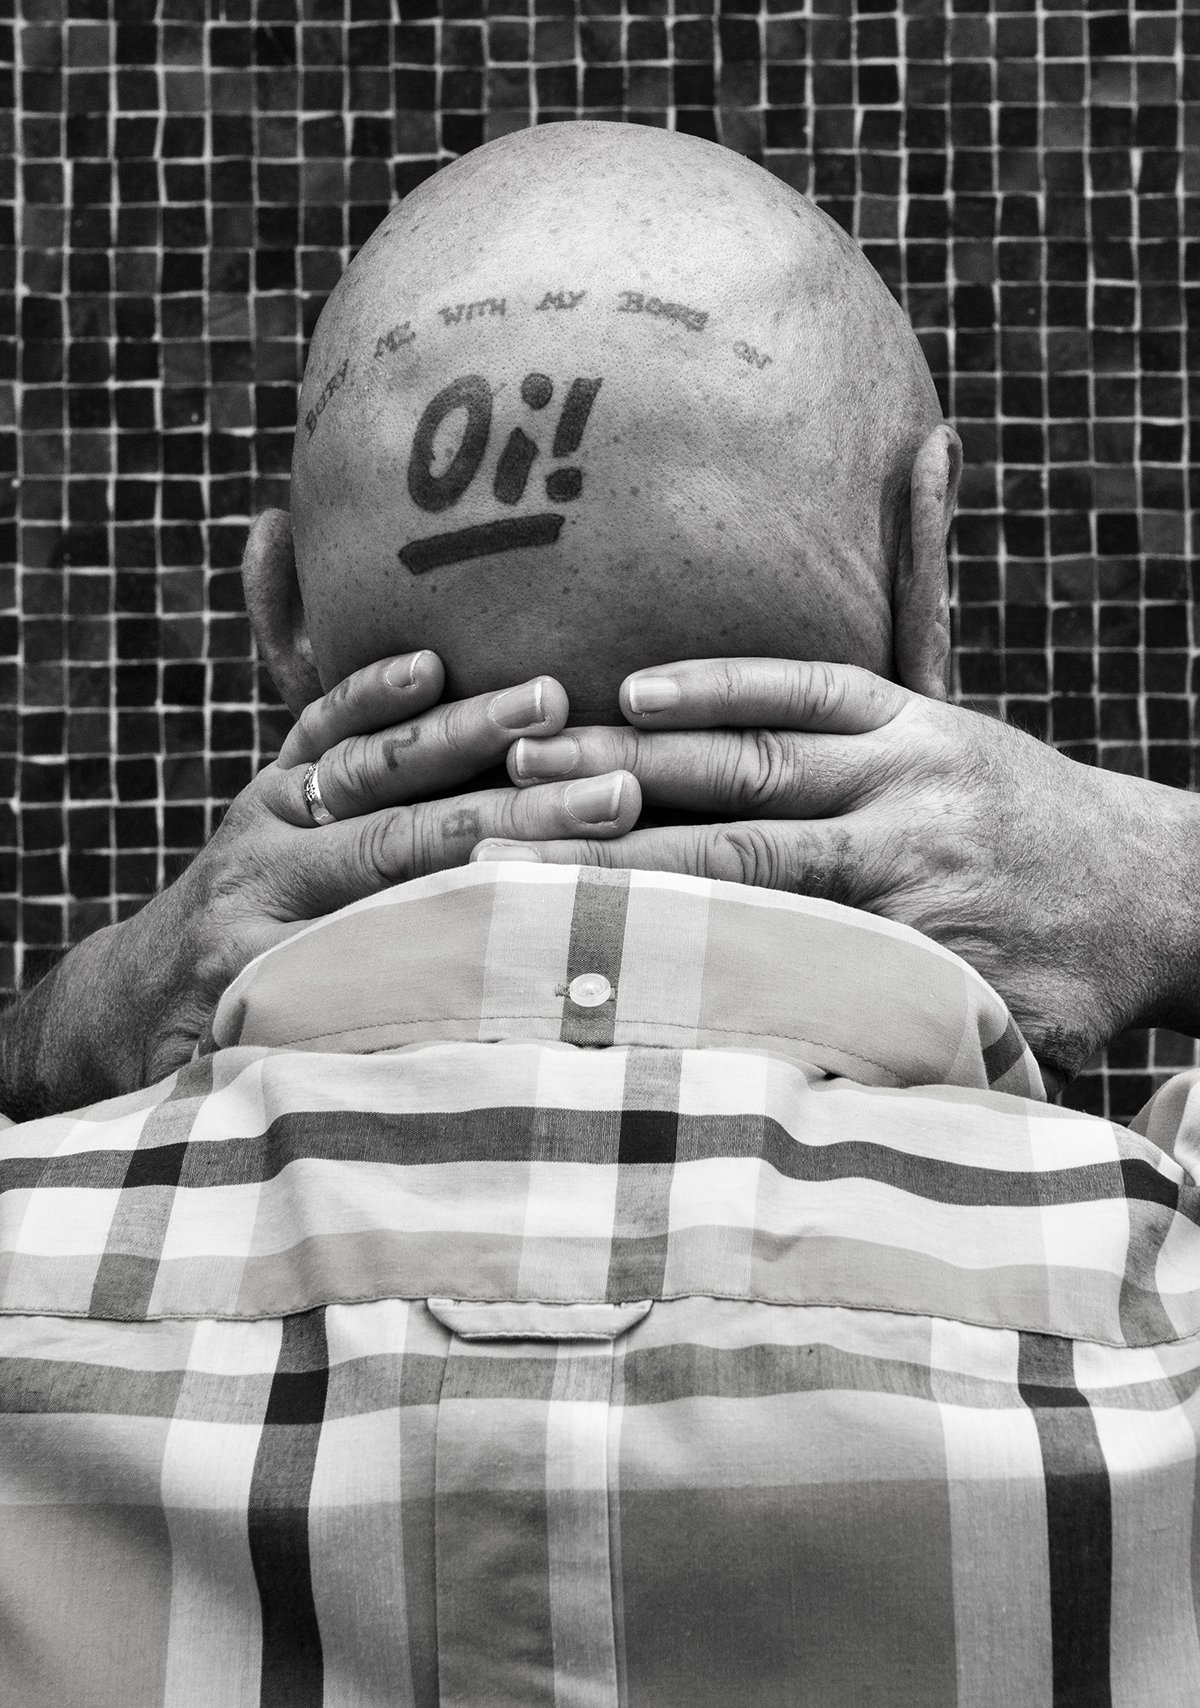 Tia Lloyd Documents Skinheads with a Powerful Portrait Project